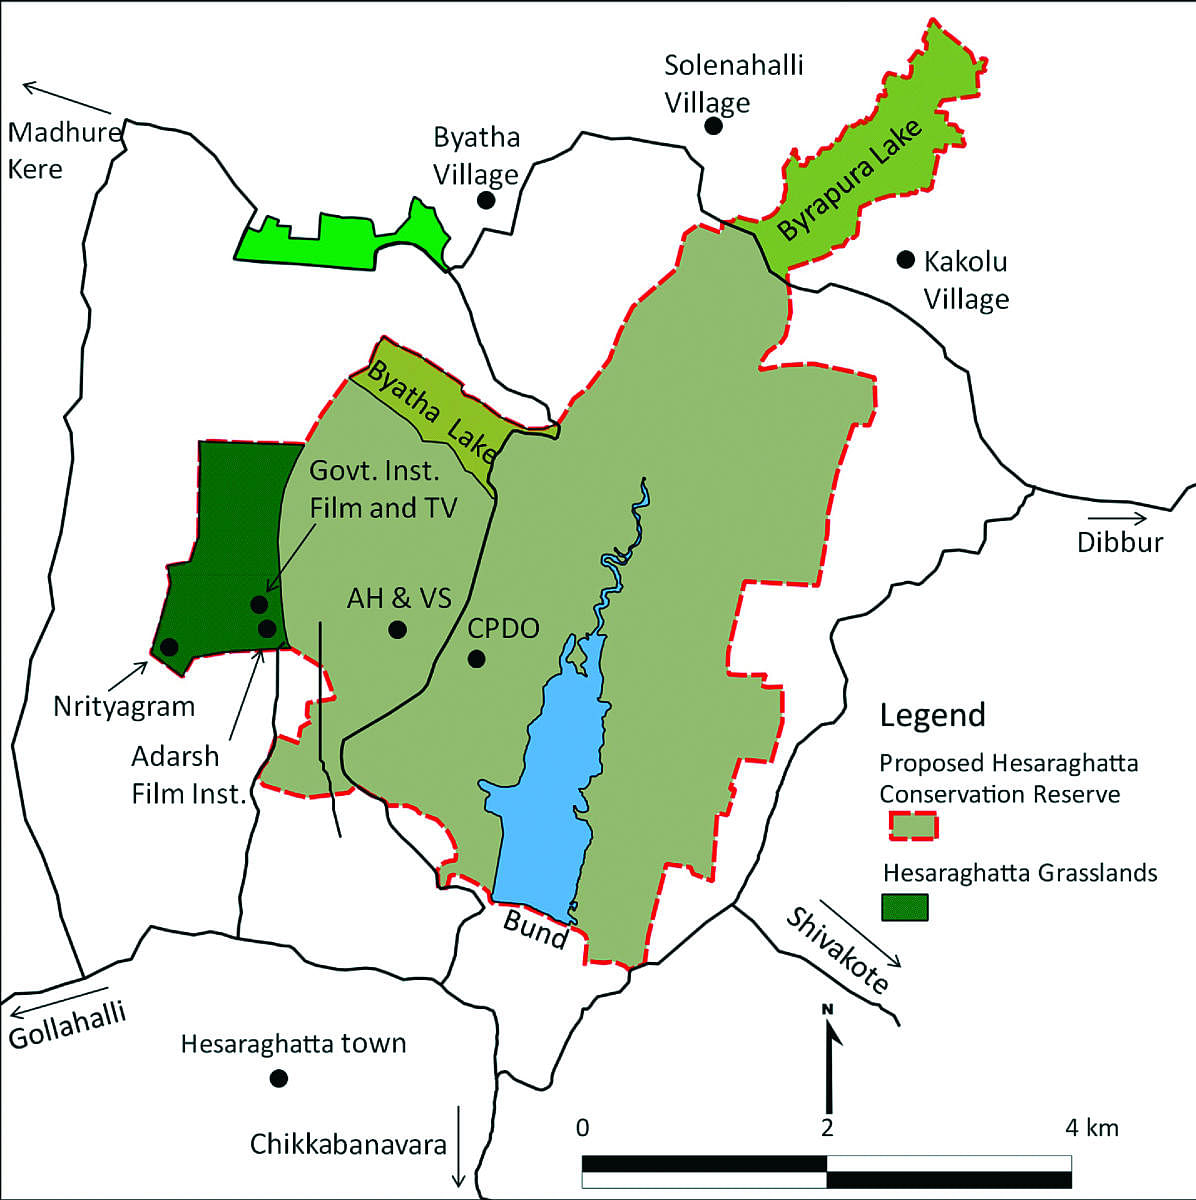 The proposed Hesaraghatta Conservation Reserve in northern Bengaluru.